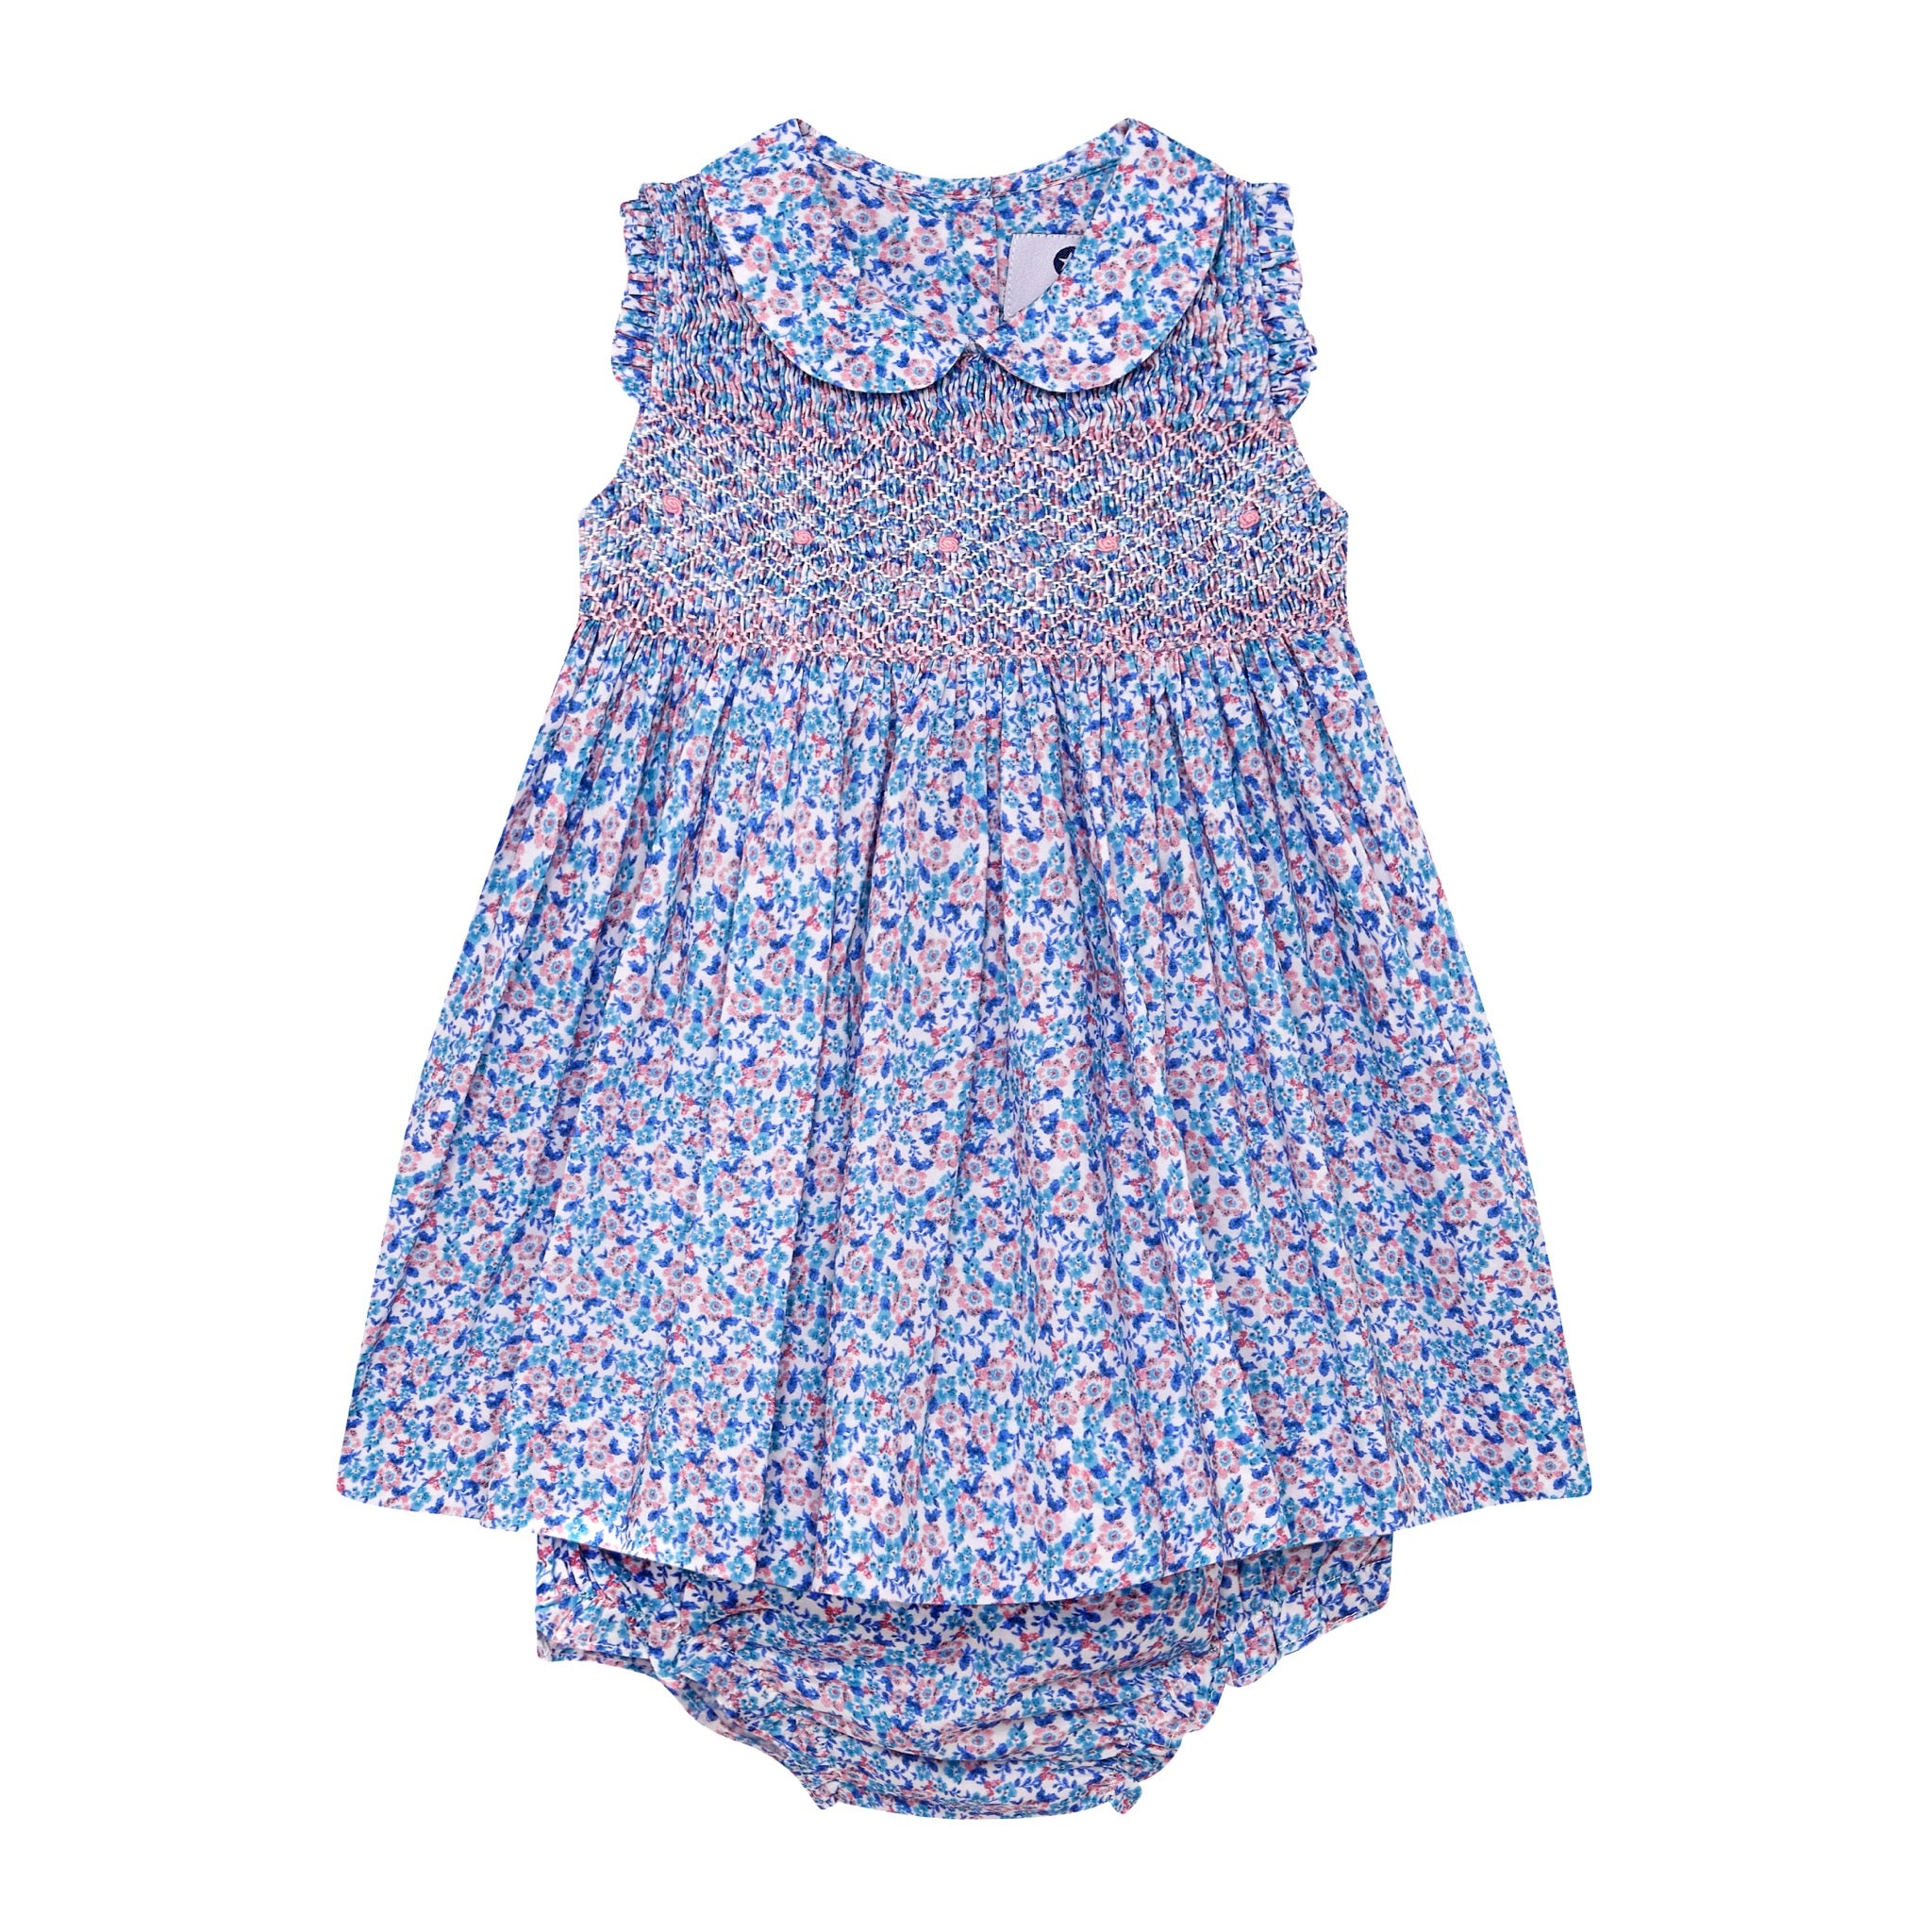 sleeveless blue floral baby dress, hand-smocked, front